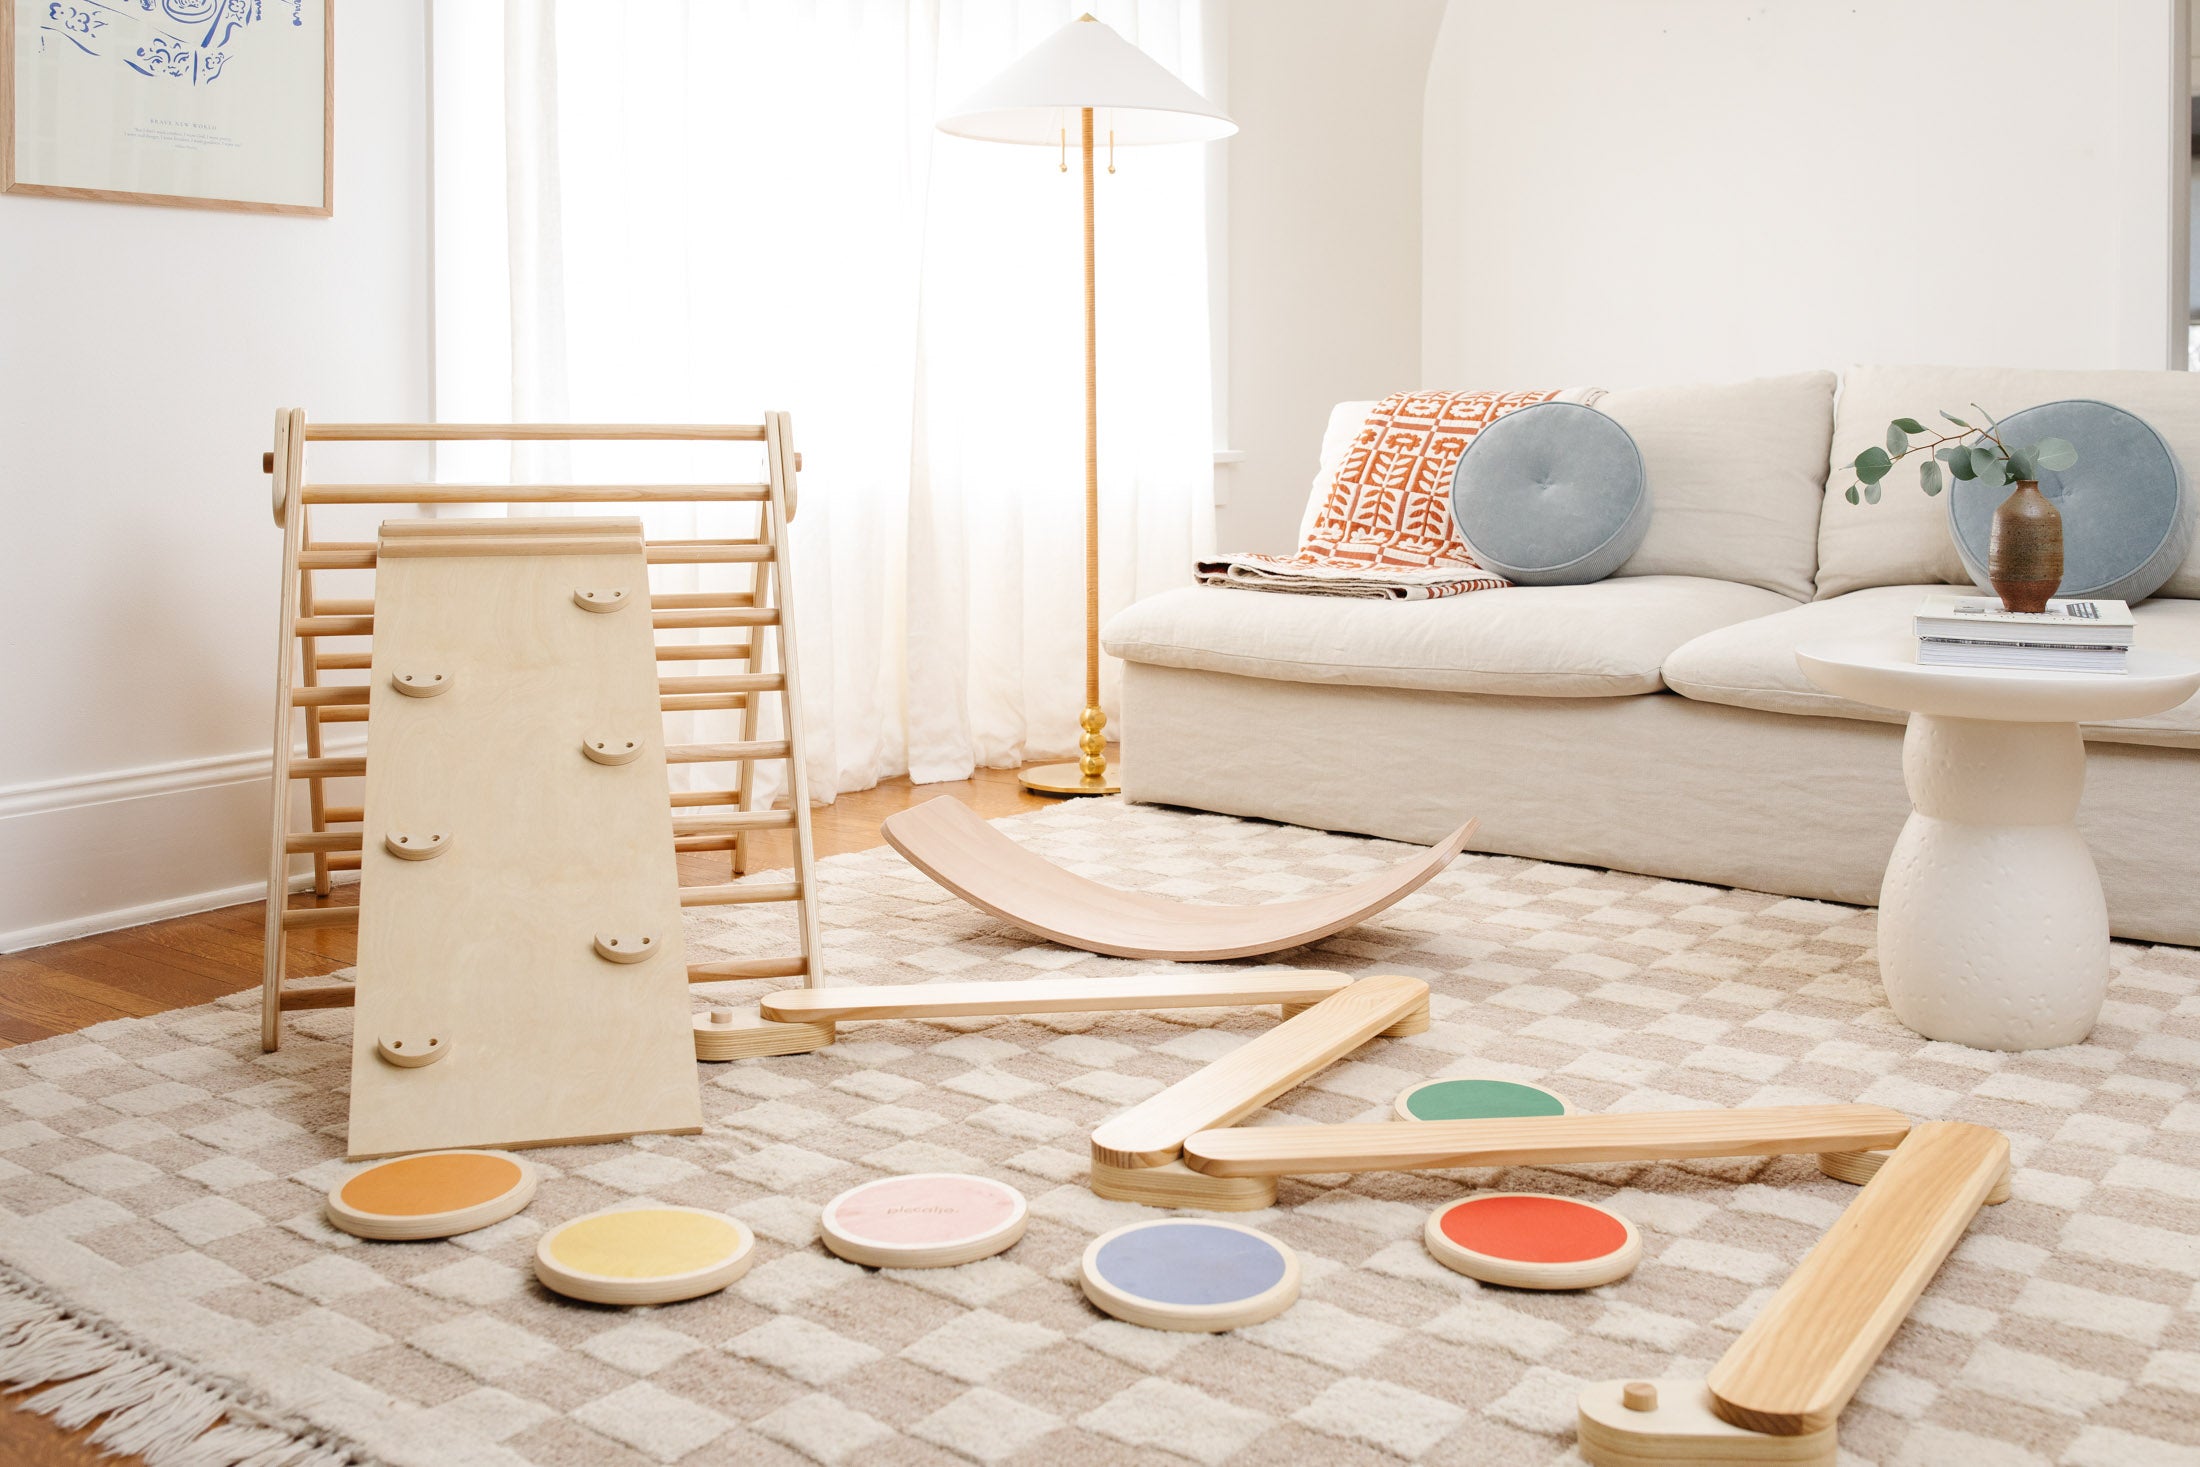 montessori wooden toys for learning and play by piccalio